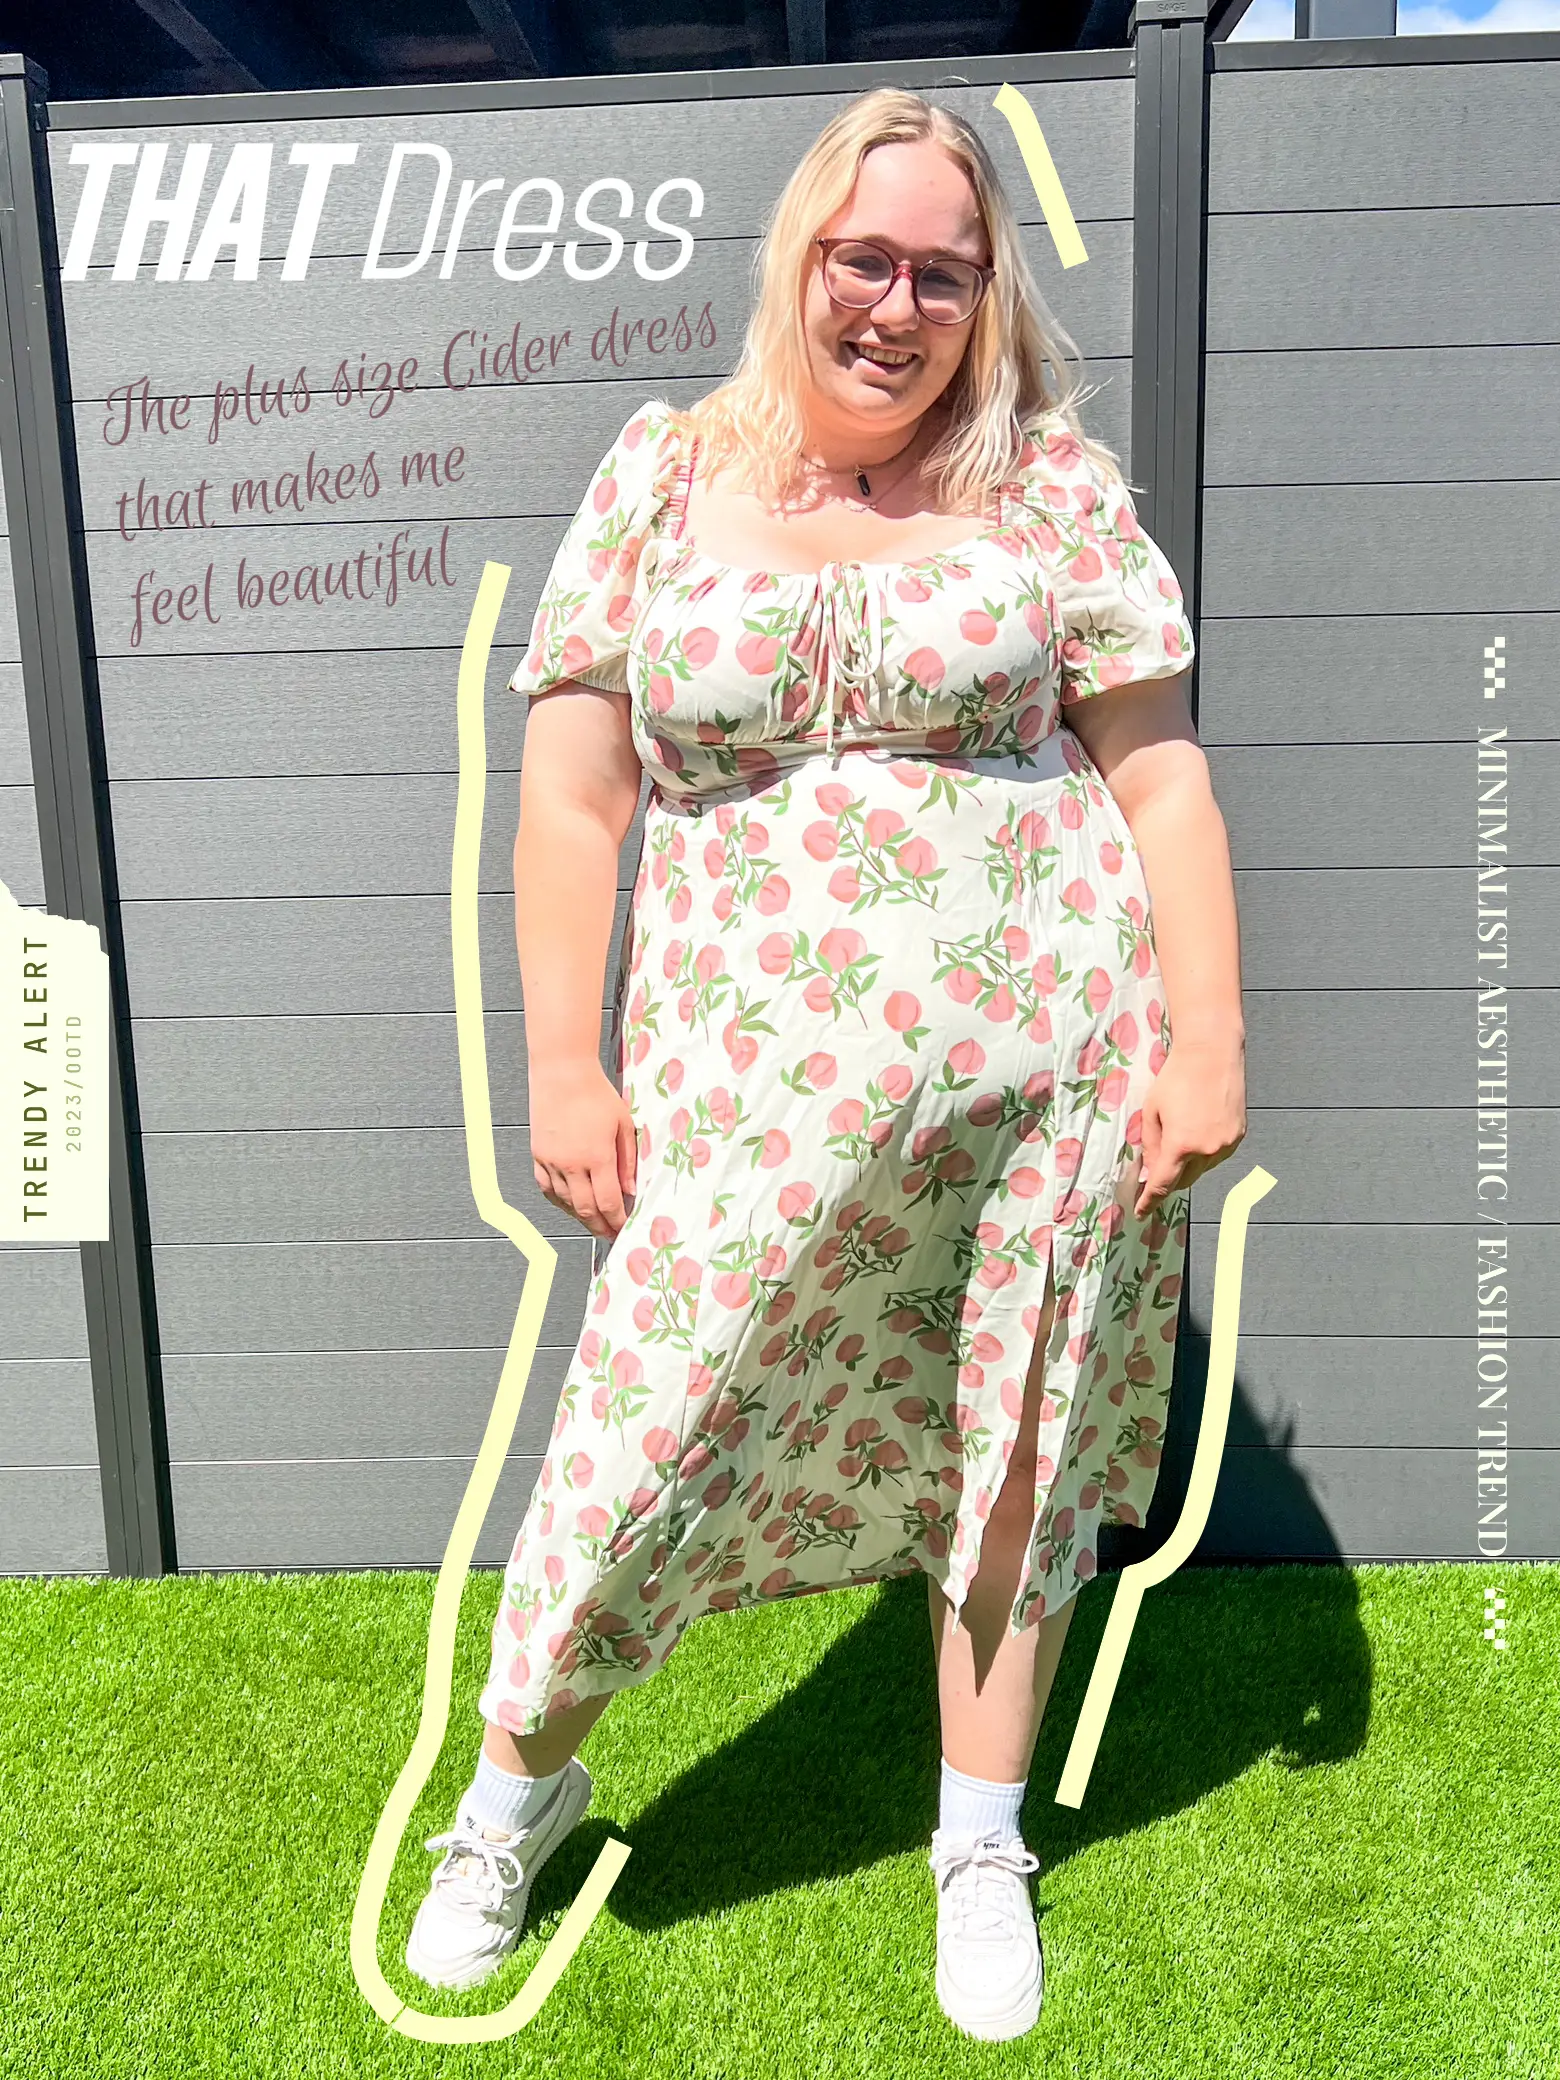 5 DAYS OF PLUS SIZE ATHLEISURE — House of Dorough